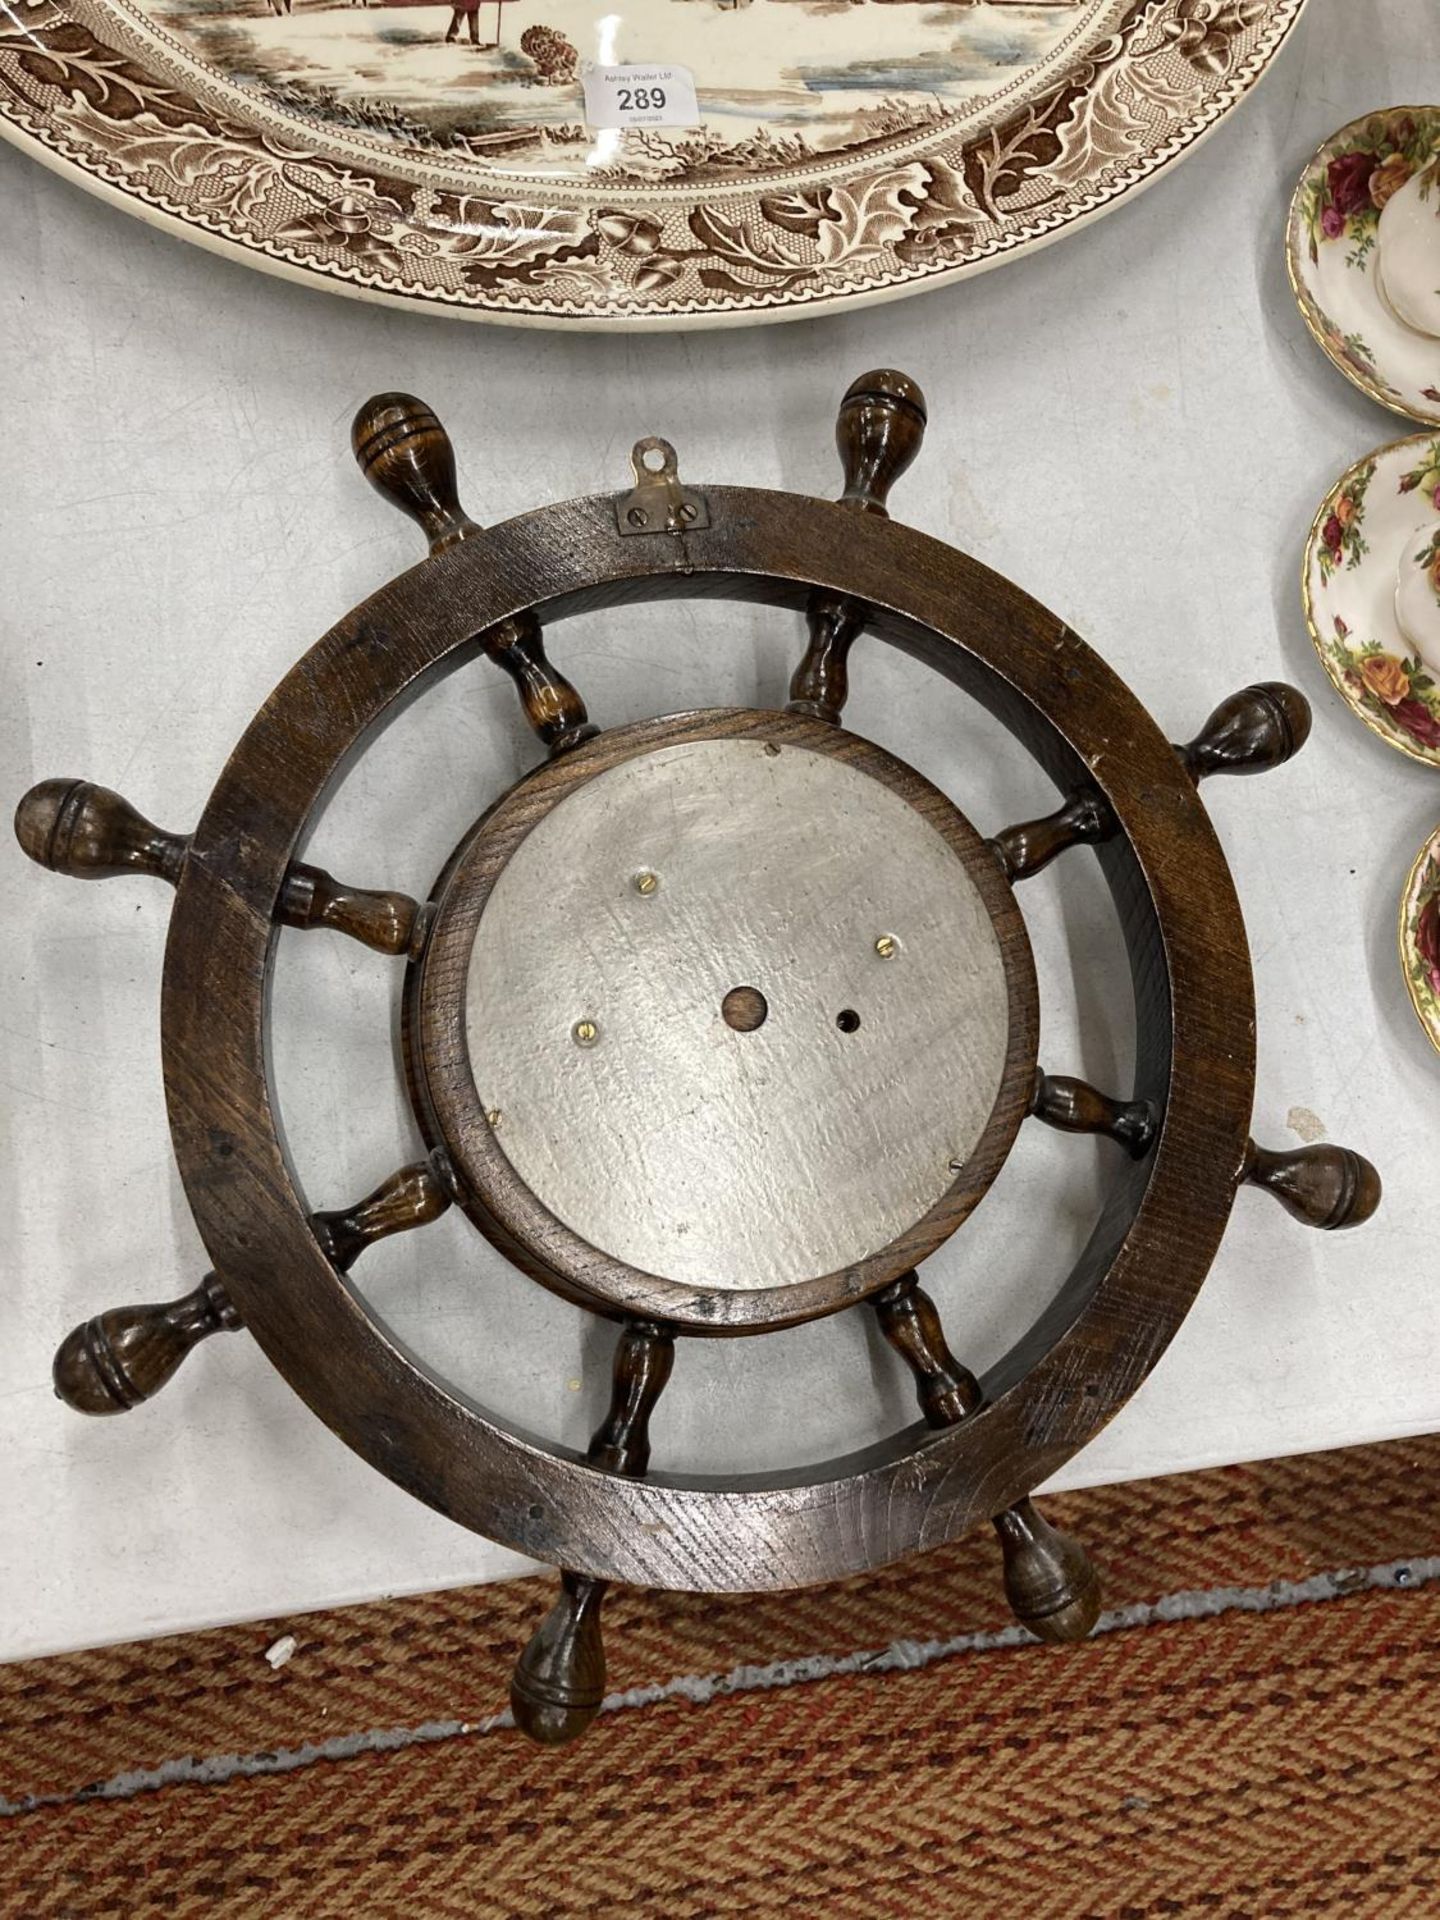 A BRASS FACED BAROMETER IN A WOODEN SHIPS WHEEL - Image 3 of 3